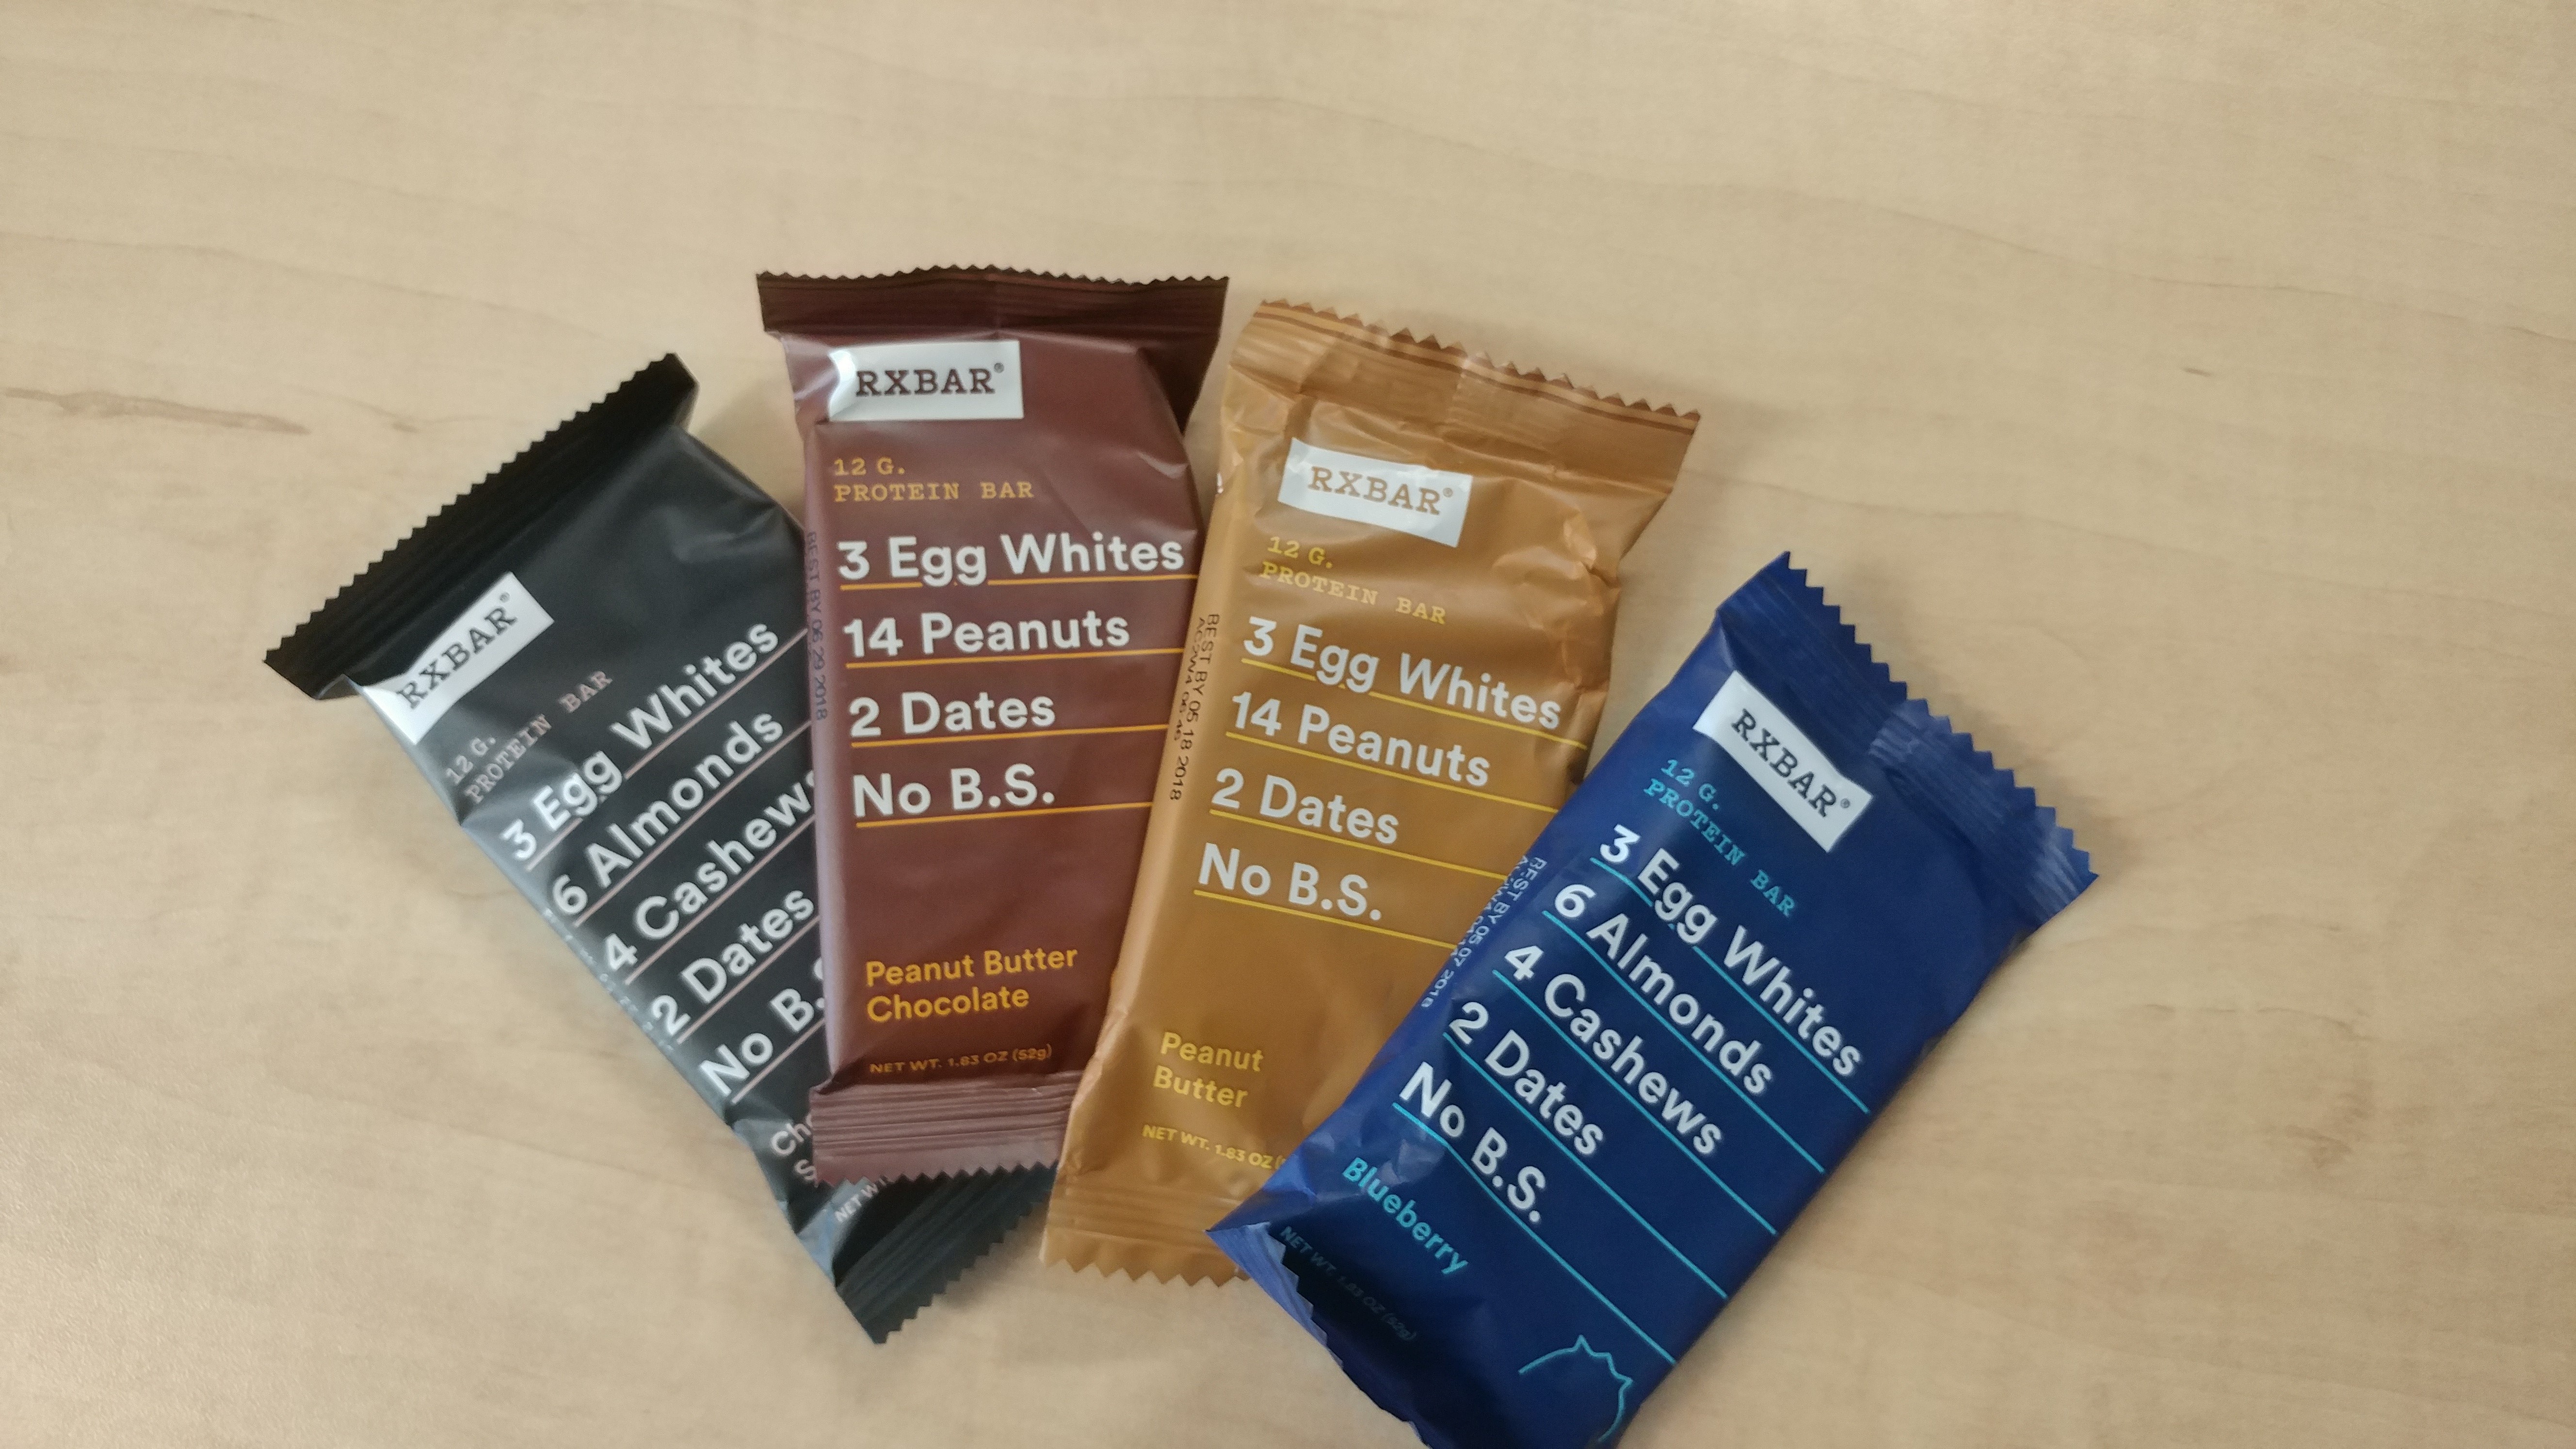 CPG Market Research: Kellogg's Looks to RXBARs to Find Cure for Decline